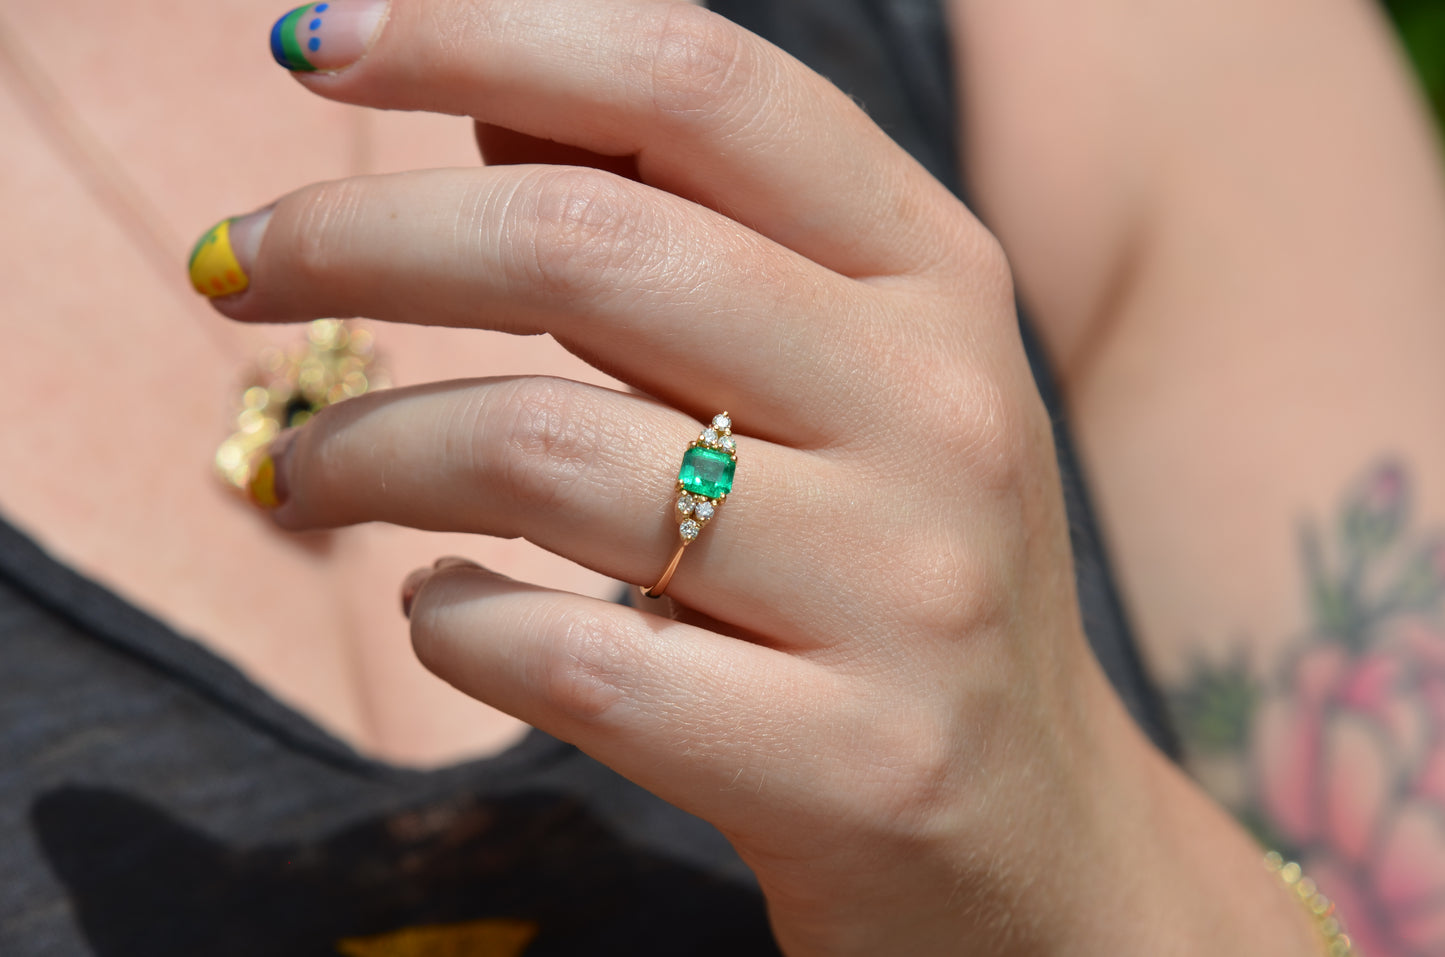 Medium-close photo of the vintage ring on the hand of a Caucasian model's left ring finger in order to show scale when worn.